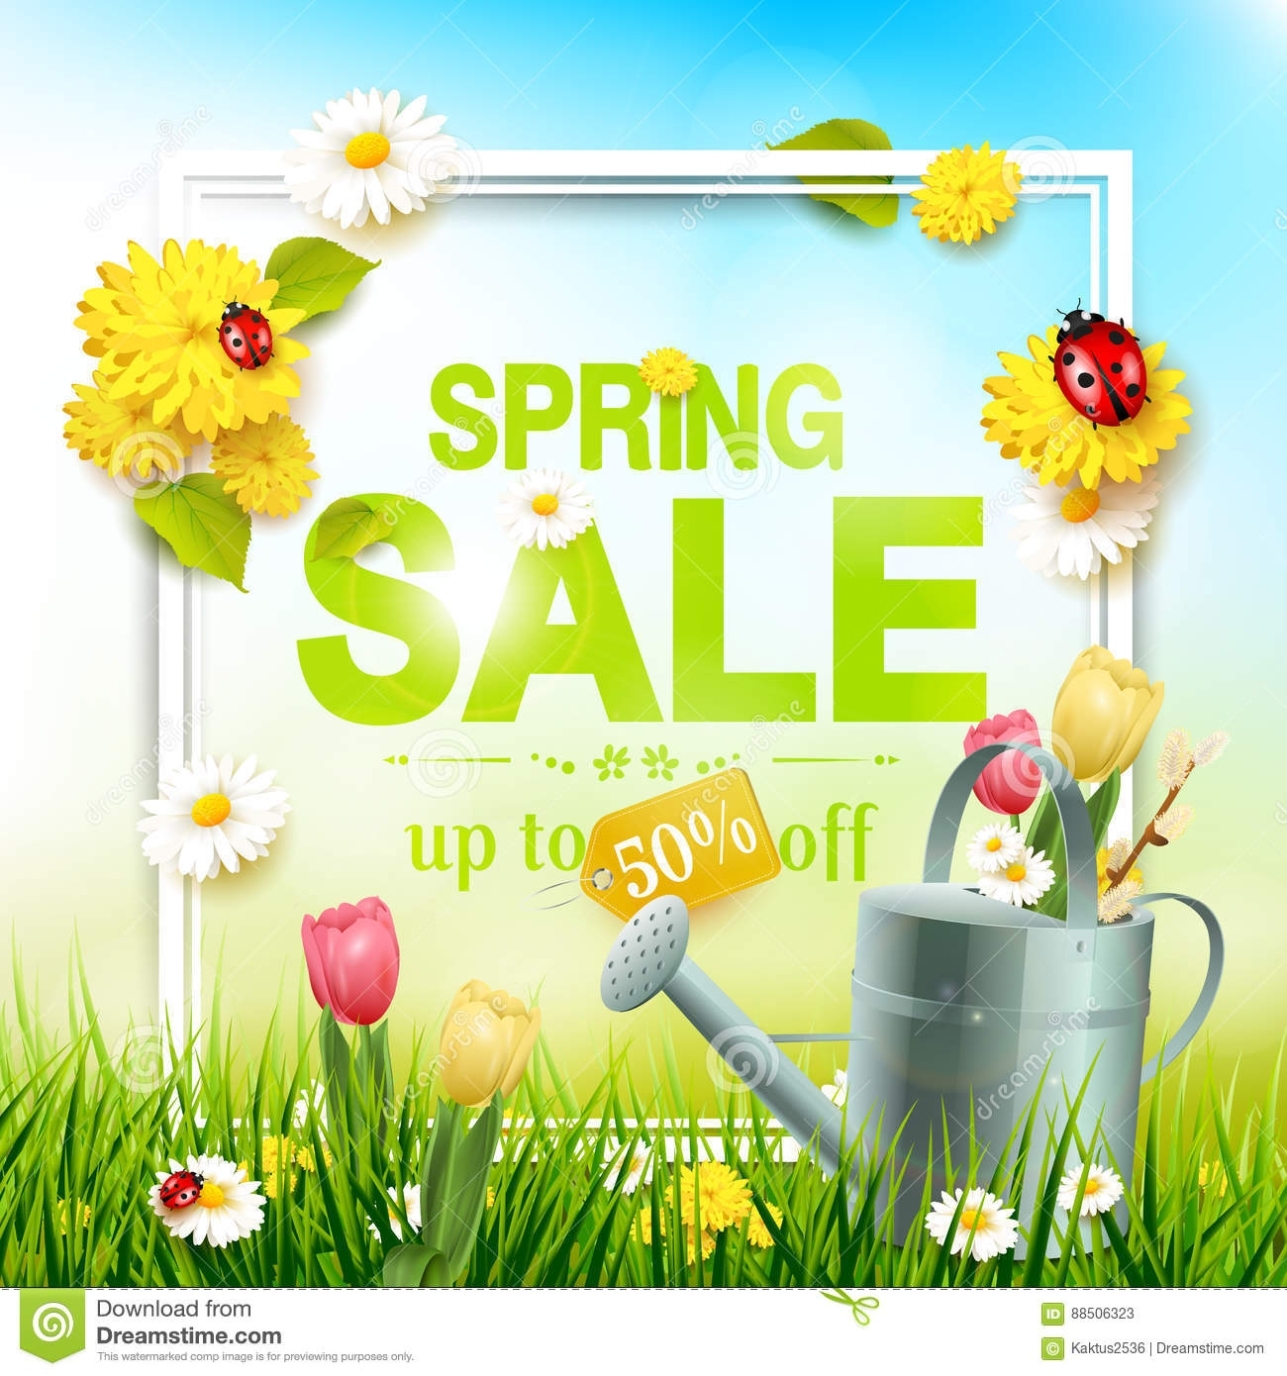 Spring Sale Flyer Stock Vector. Illustration Of Plant - 88506323 With Plant Sale Flyer Template